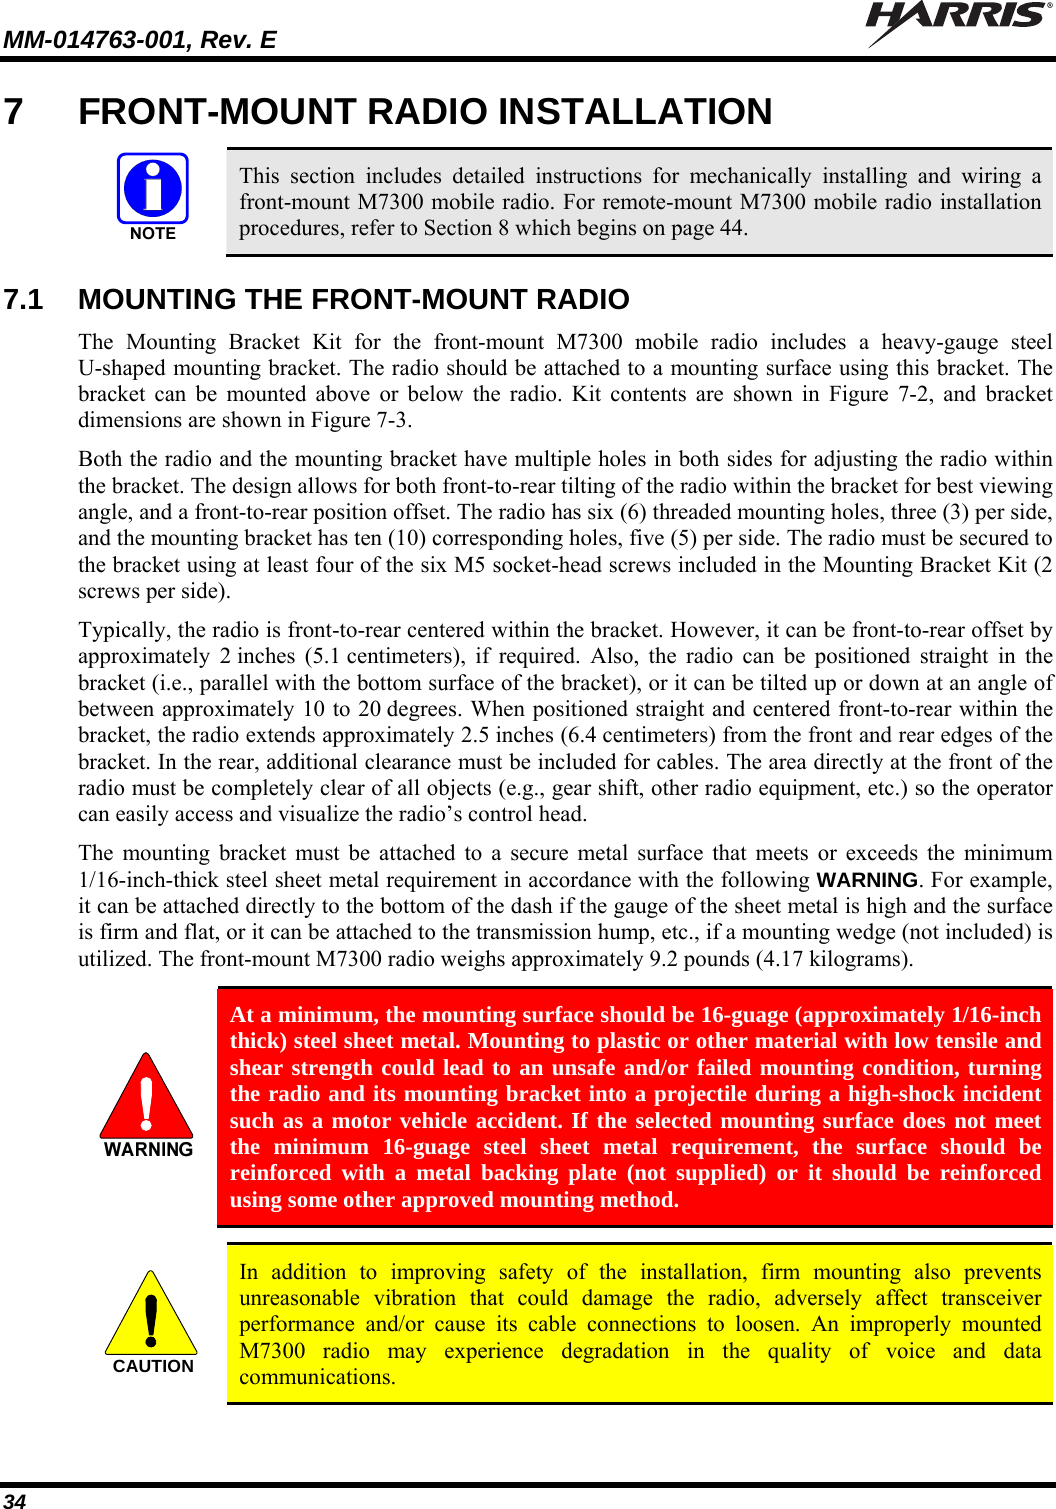 MM-014763-001, Rev. E   34 7  FRONT-MOUNT RADIO INSTALLATION   This section includes detailed instructions for mechanically installing and wiring a front-mount M7300 mobile radio. For remote-mount M7300 mobile radio installation procedures, refer to Section 8 which begins on page 44.  7.1  MOUNTING THE FRONT-MOUNT RADIO The Mounting Bracket Kit for the front-mount M7300 mobile radio includes a heavy-gauge steel U-shaped mounting bracket. The radio should be attached to a mounting surface using this bracket. The bracket can be mounted above or below the radio. Kit contents are shown in Figure 7-2, and bracket dimensions are shown in Figure 7-3. Both the radio and the mounting bracket have multiple holes in both sides for adjusting the radio within the bracket. The design allows for both front-to-rear tilting of the radio within the bracket for best viewing angle, and a front-to-rear position offset. The radio has six (6) threaded mounting holes, three (3) per side, and the mounting bracket has ten (10) corresponding holes, five (5) per side. The radio must be secured to the bracket using at least four of the six M5 socket-head screws included in the Mounting Bracket Kit (2 screws per side). Typically, the radio is front-to-rear centered within the bracket. However, it can be front-to-rear offset by approximately 2 inches (5.1 centimeters), if required. Also, the radio can be positioned straight in the bracket (i.e., parallel with the bottom surface of the bracket), or it can be tilted up or down at an angle of between approximately 10 to 20 degrees. When positioned straight and centered front-to-rear within the bracket, the radio extends approximately 2.5 inches (6.4 centimeters) from the front and rear edges of the bracket. In the rear, additional clearance must be included for cables. The area directly at the front of the radio must be completely clear of all objects (e.g., gear shift, other radio equipment, etc.) so the operator can easily access and visualize the radio’s control head. The mounting bracket must be attached to a secure metal surface that meets or exceeds the minimum 1/16-inch-thick steel sheet metal requirement in accordance with the following WARNING. For example, it can be attached directly to the bottom of the dash if the gauge of the sheet metal is high and the surface is firm and flat, or it can be attached to the transmission hump, etc., if a mounting wedge (not included) is utilized. The front-mount M7300 radio weighs approximately 9.2 pounds (4.17 kilograms).   At a minimum, the mounting surface should be 16-guage (approximately 1/16-inch thick) steel sheet metal. Mounting to plastic or other material with low tensile and shear strength could lead to an unsafe and/or failed mounting condition, turning the radio and its mounting bracket into a projectile during a high-shock incident such as a motor vehicle accident. If the selected mounting surface does not meet the minimum 16-guage steel sheet metal requirement, the surface should be reinforced with a metal backing plate (not supplied) or it should be reinforced using some other approved mounting method.  CAUTION  In addition to improving safety of the installation, firm mounting also prevents unreasonable vibration that could damage the radio, adversely affect transceiver performance and/or cause its cable connections to loosen. An improperly mounted M7300 radio may experience degradation in the quality of voice and data communications.  